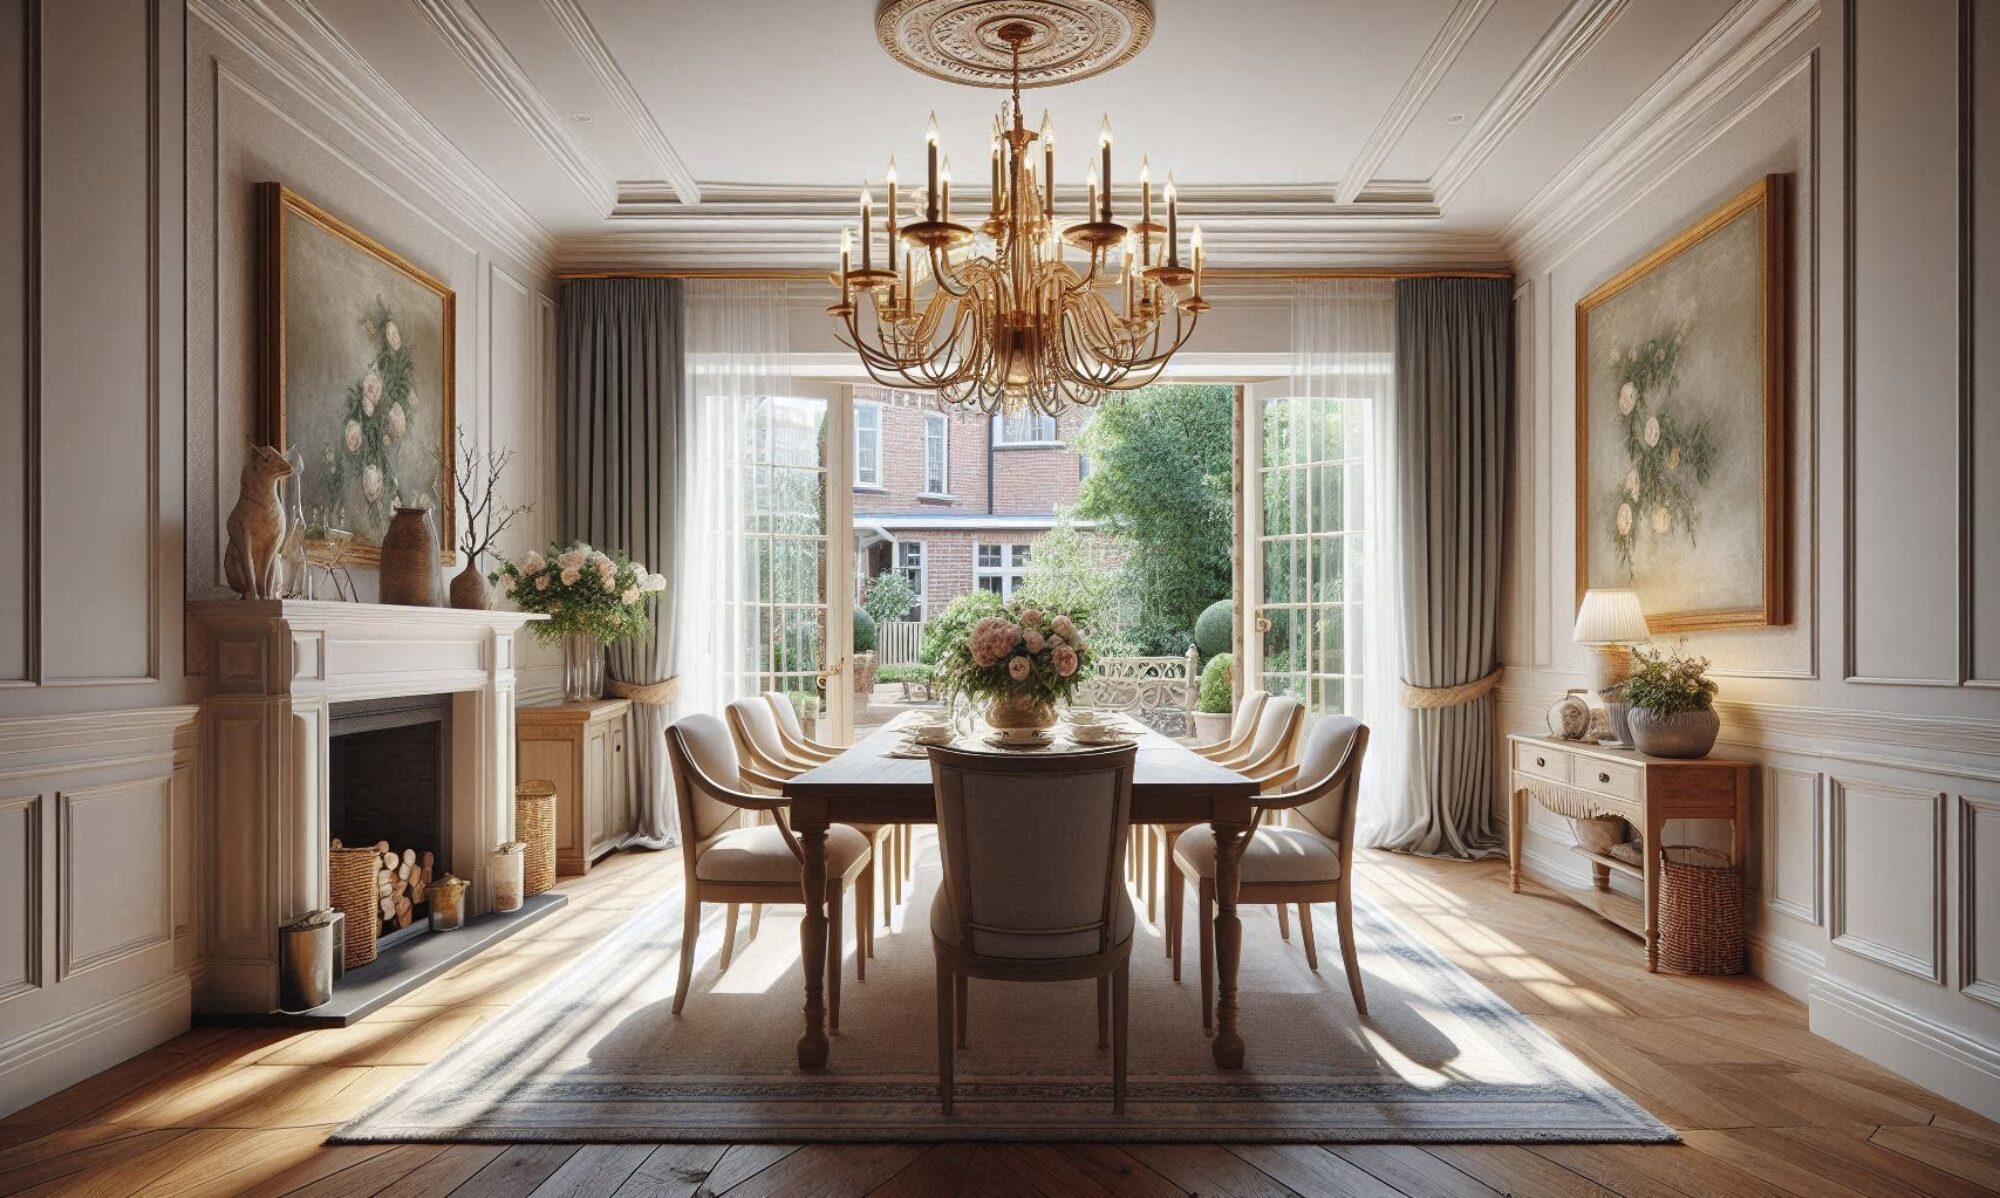 Staged dining room - This image created for Scena Home Staging by AI